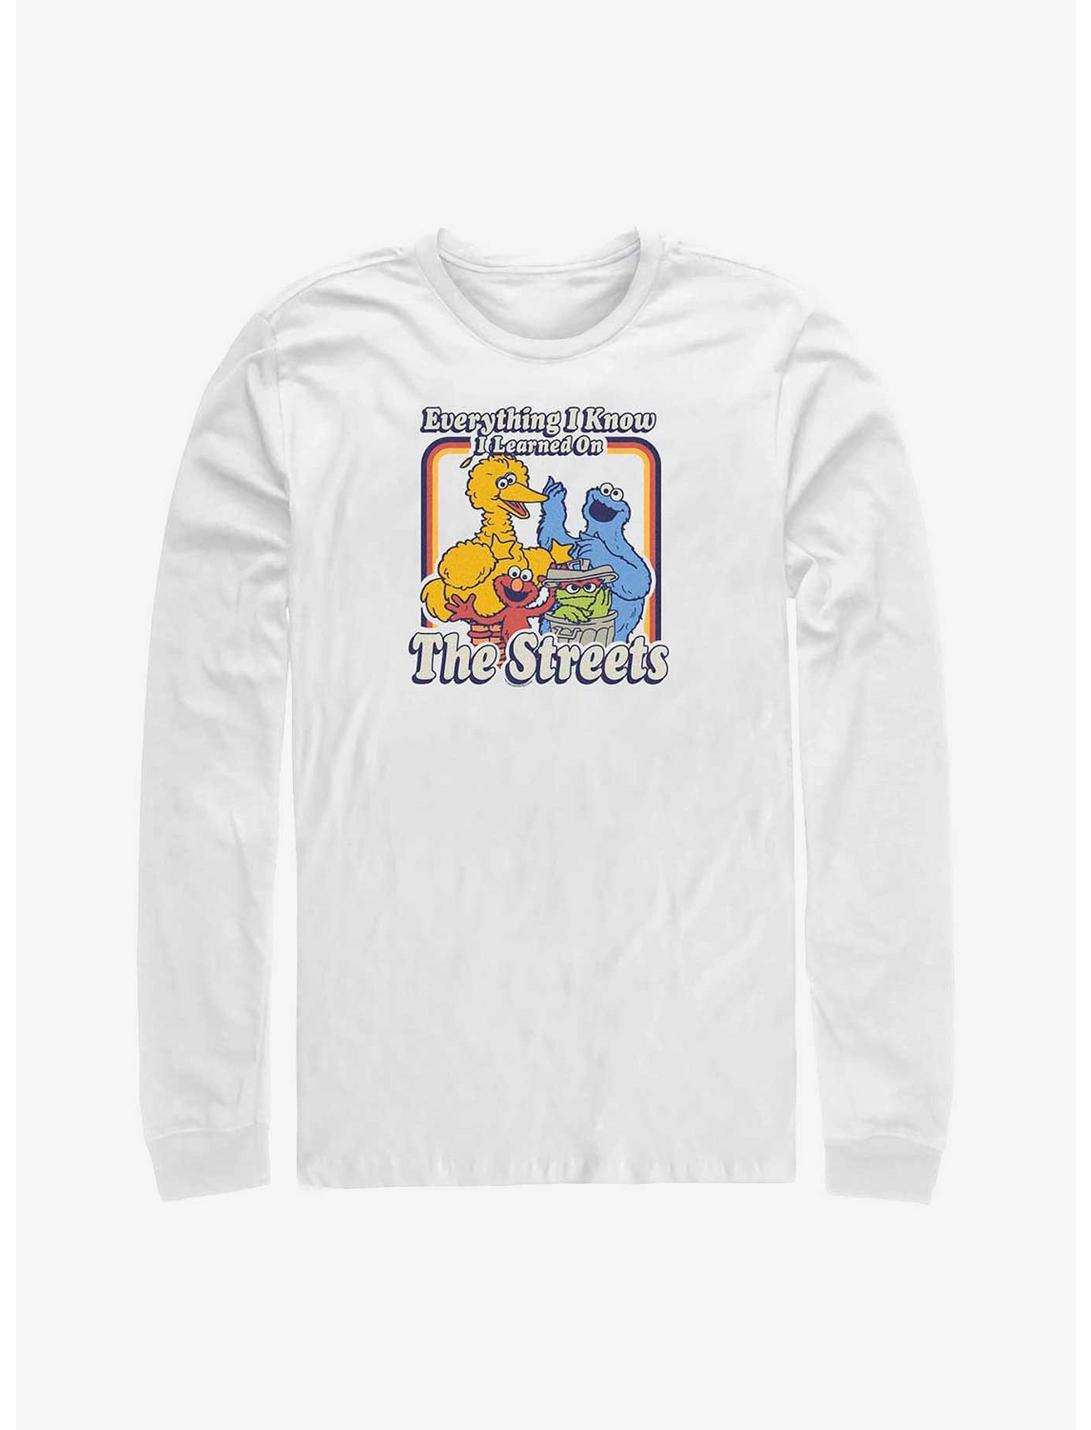 Sesame Street Everything I Know I Learned On The Streets Long-Sleeve T-Shirt, WHITE, hi-res